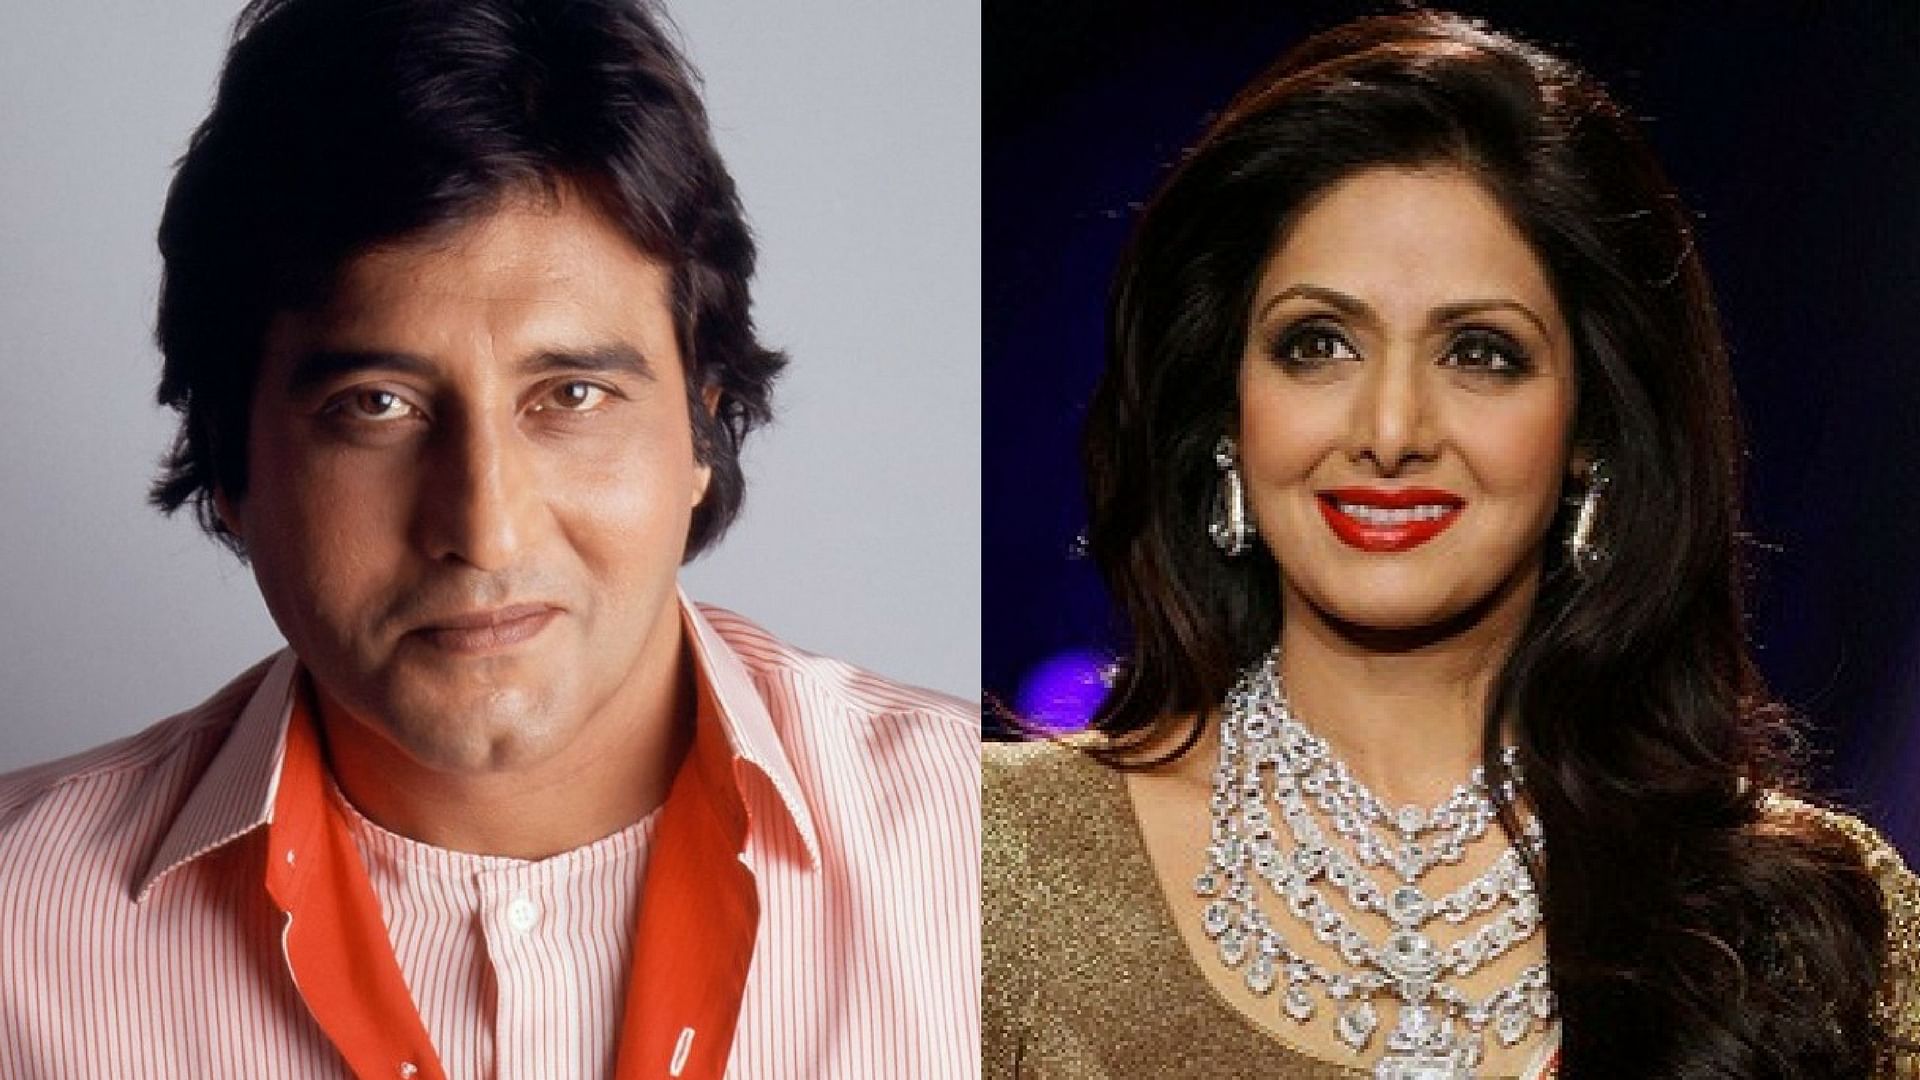 The late Vinod Khanna has been awarded the Dadasaheb Phalke Award, while the late Sridevi has been honoured with the Best Actress Award for <i>Mom</i>.